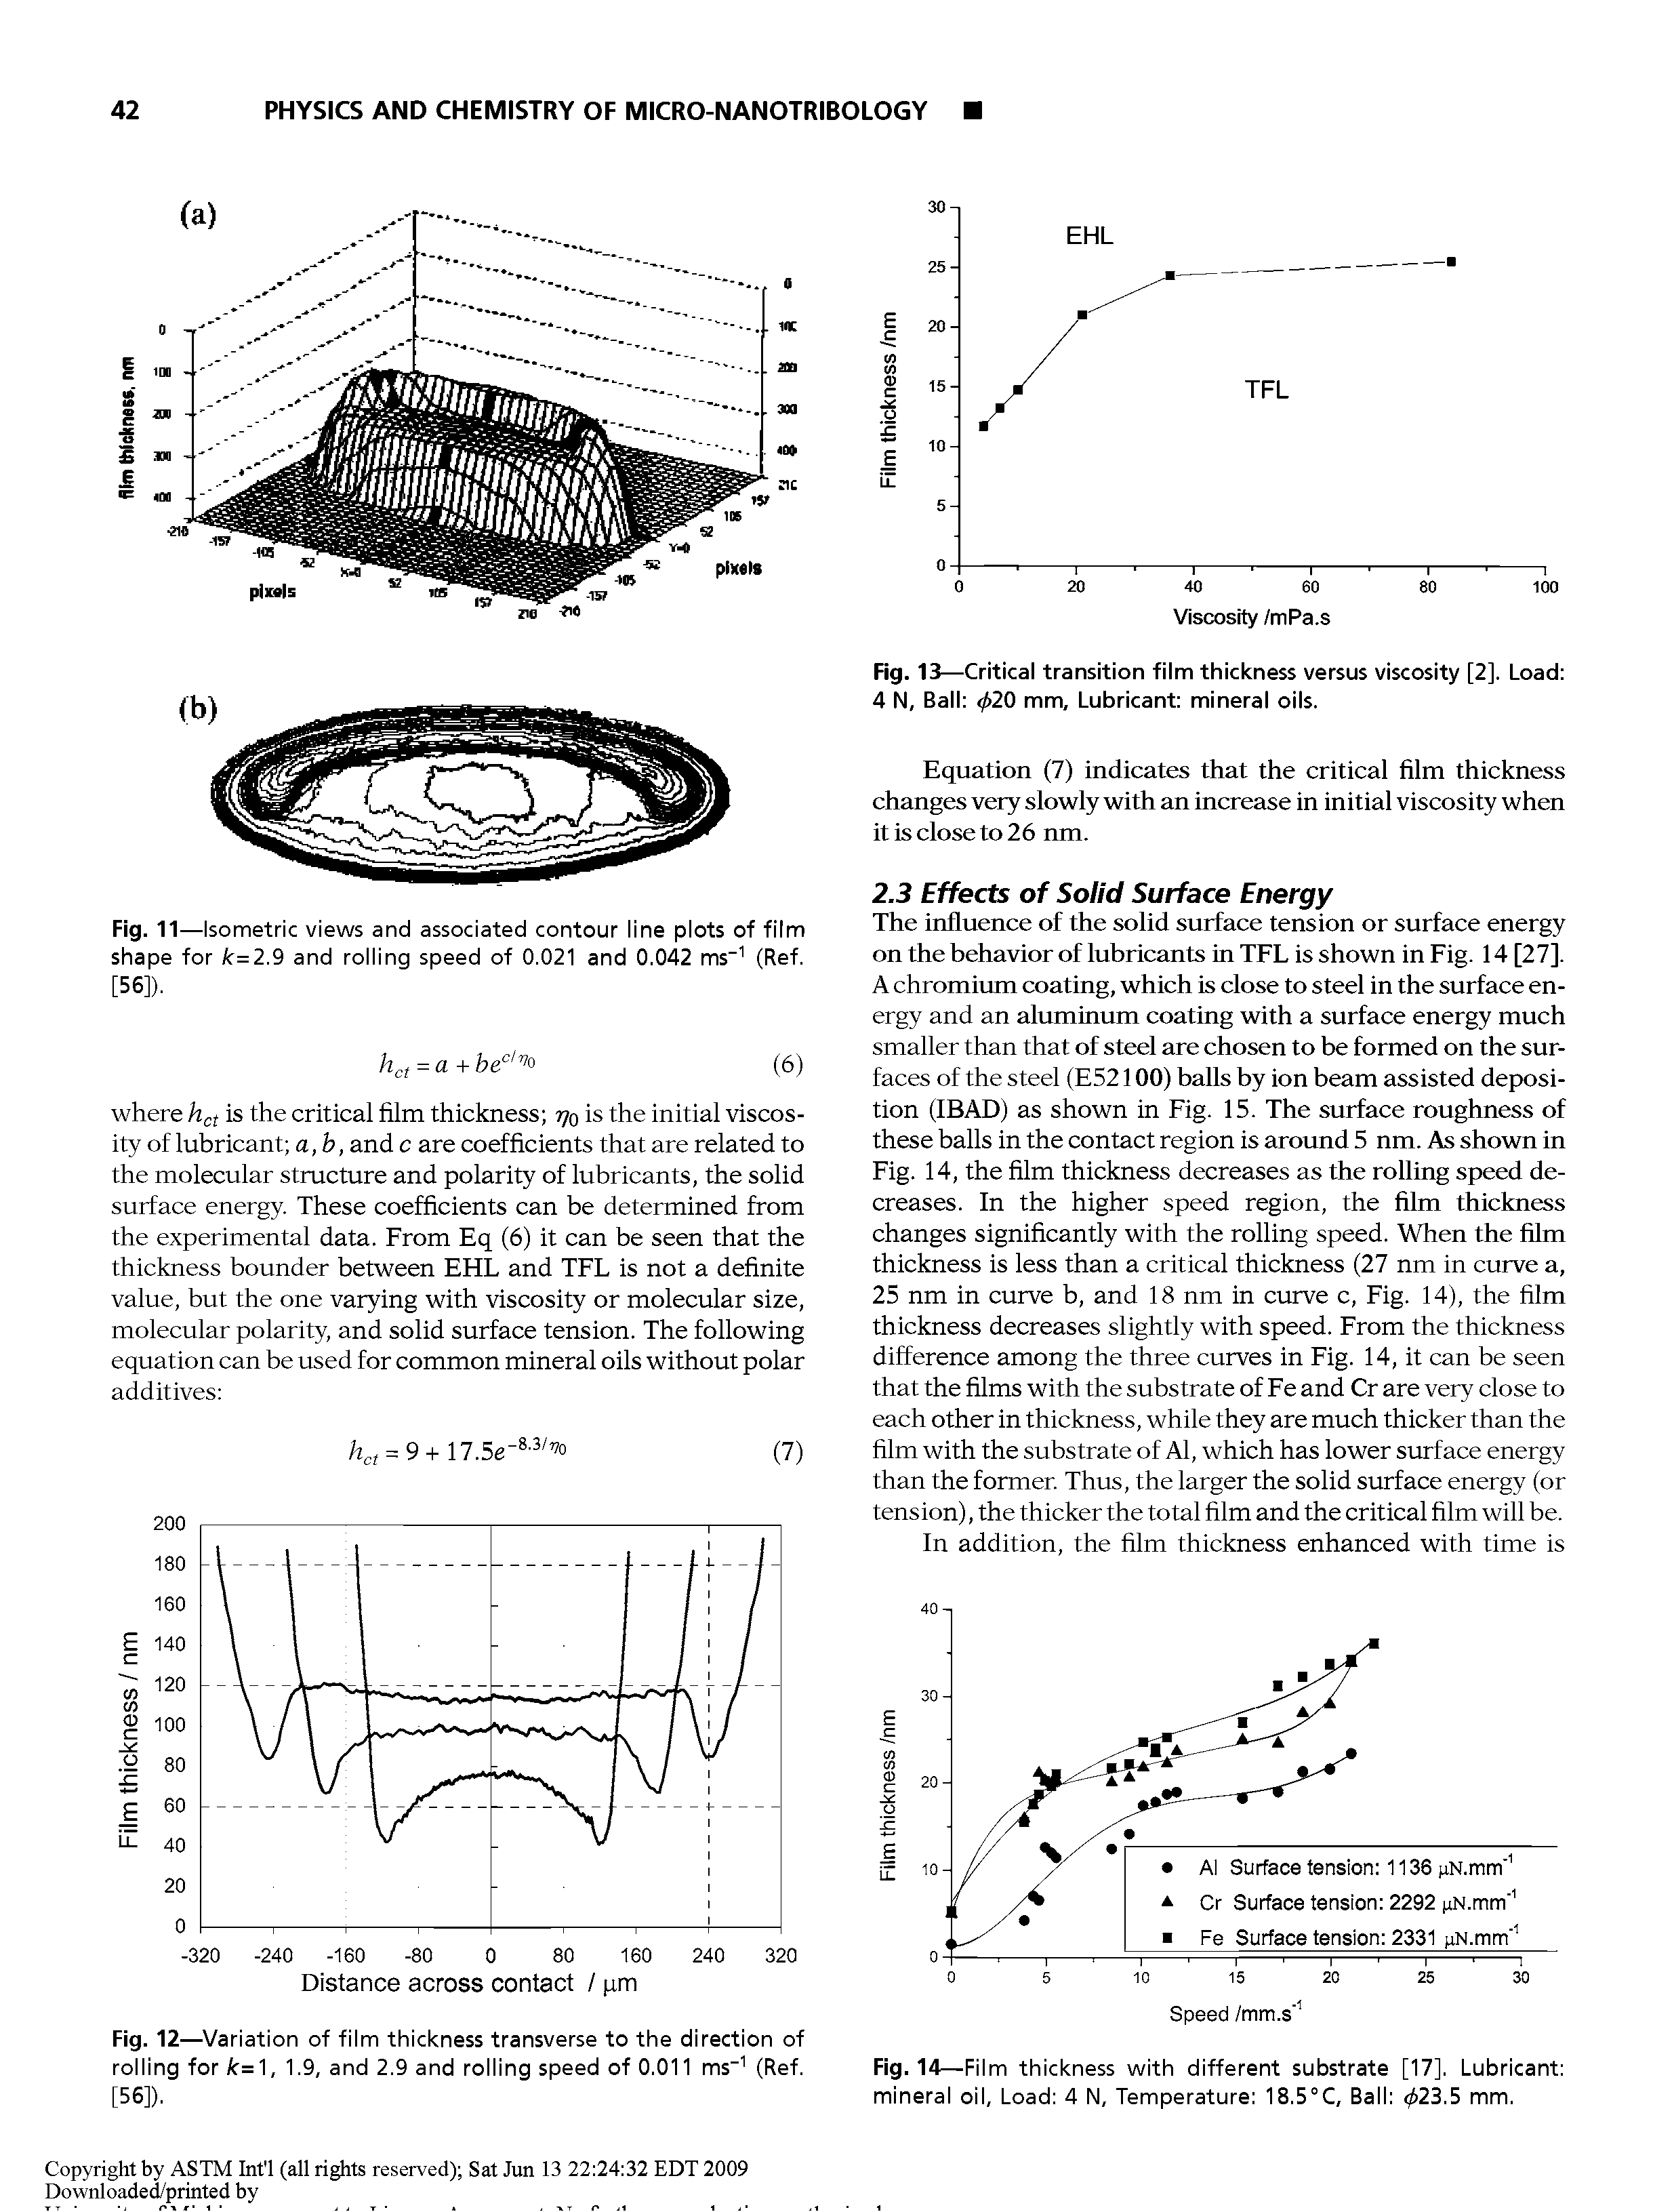 Fig. 11 —Isometric views and associated contour line plots of film shape for k=2.9 and rolling speed of 0.021 and 0.042 ms" (Ref. [56]).